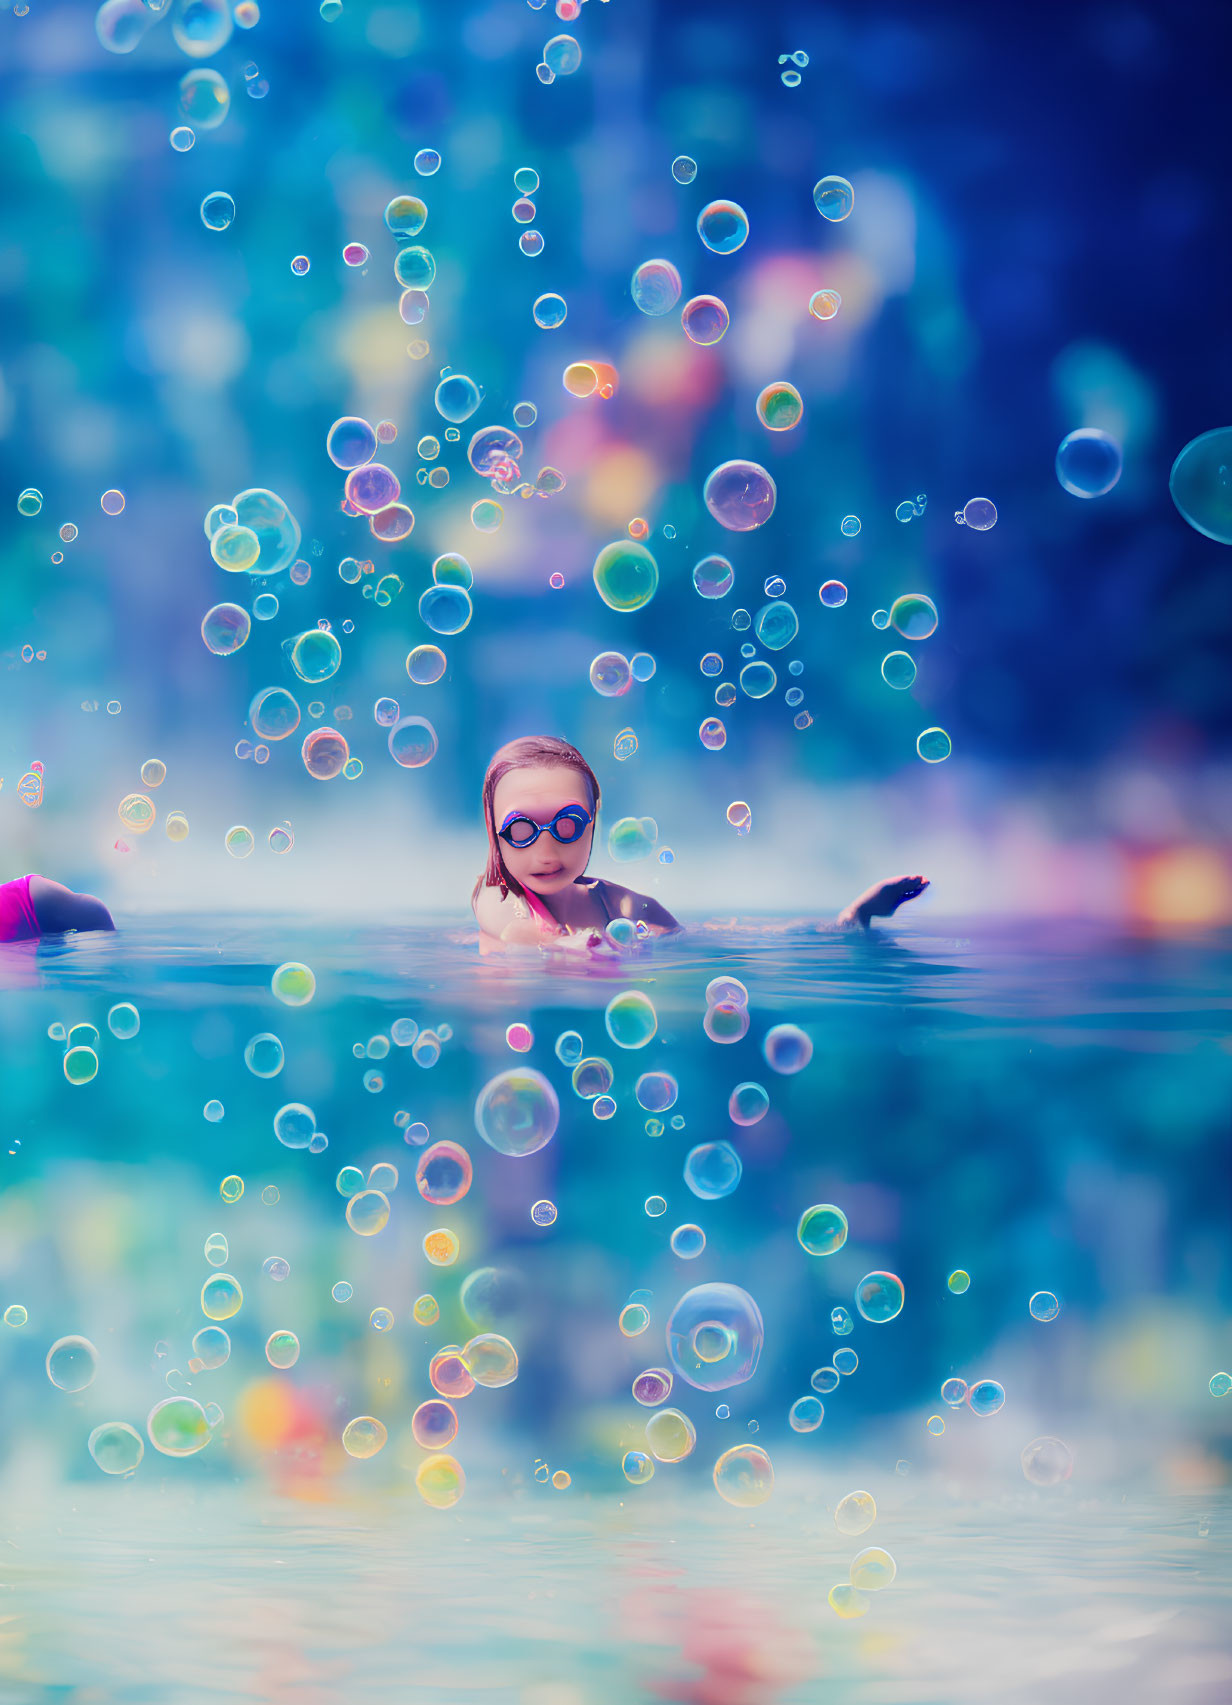 Child Swimming in Sparkling Water with Iridescent Bubbles